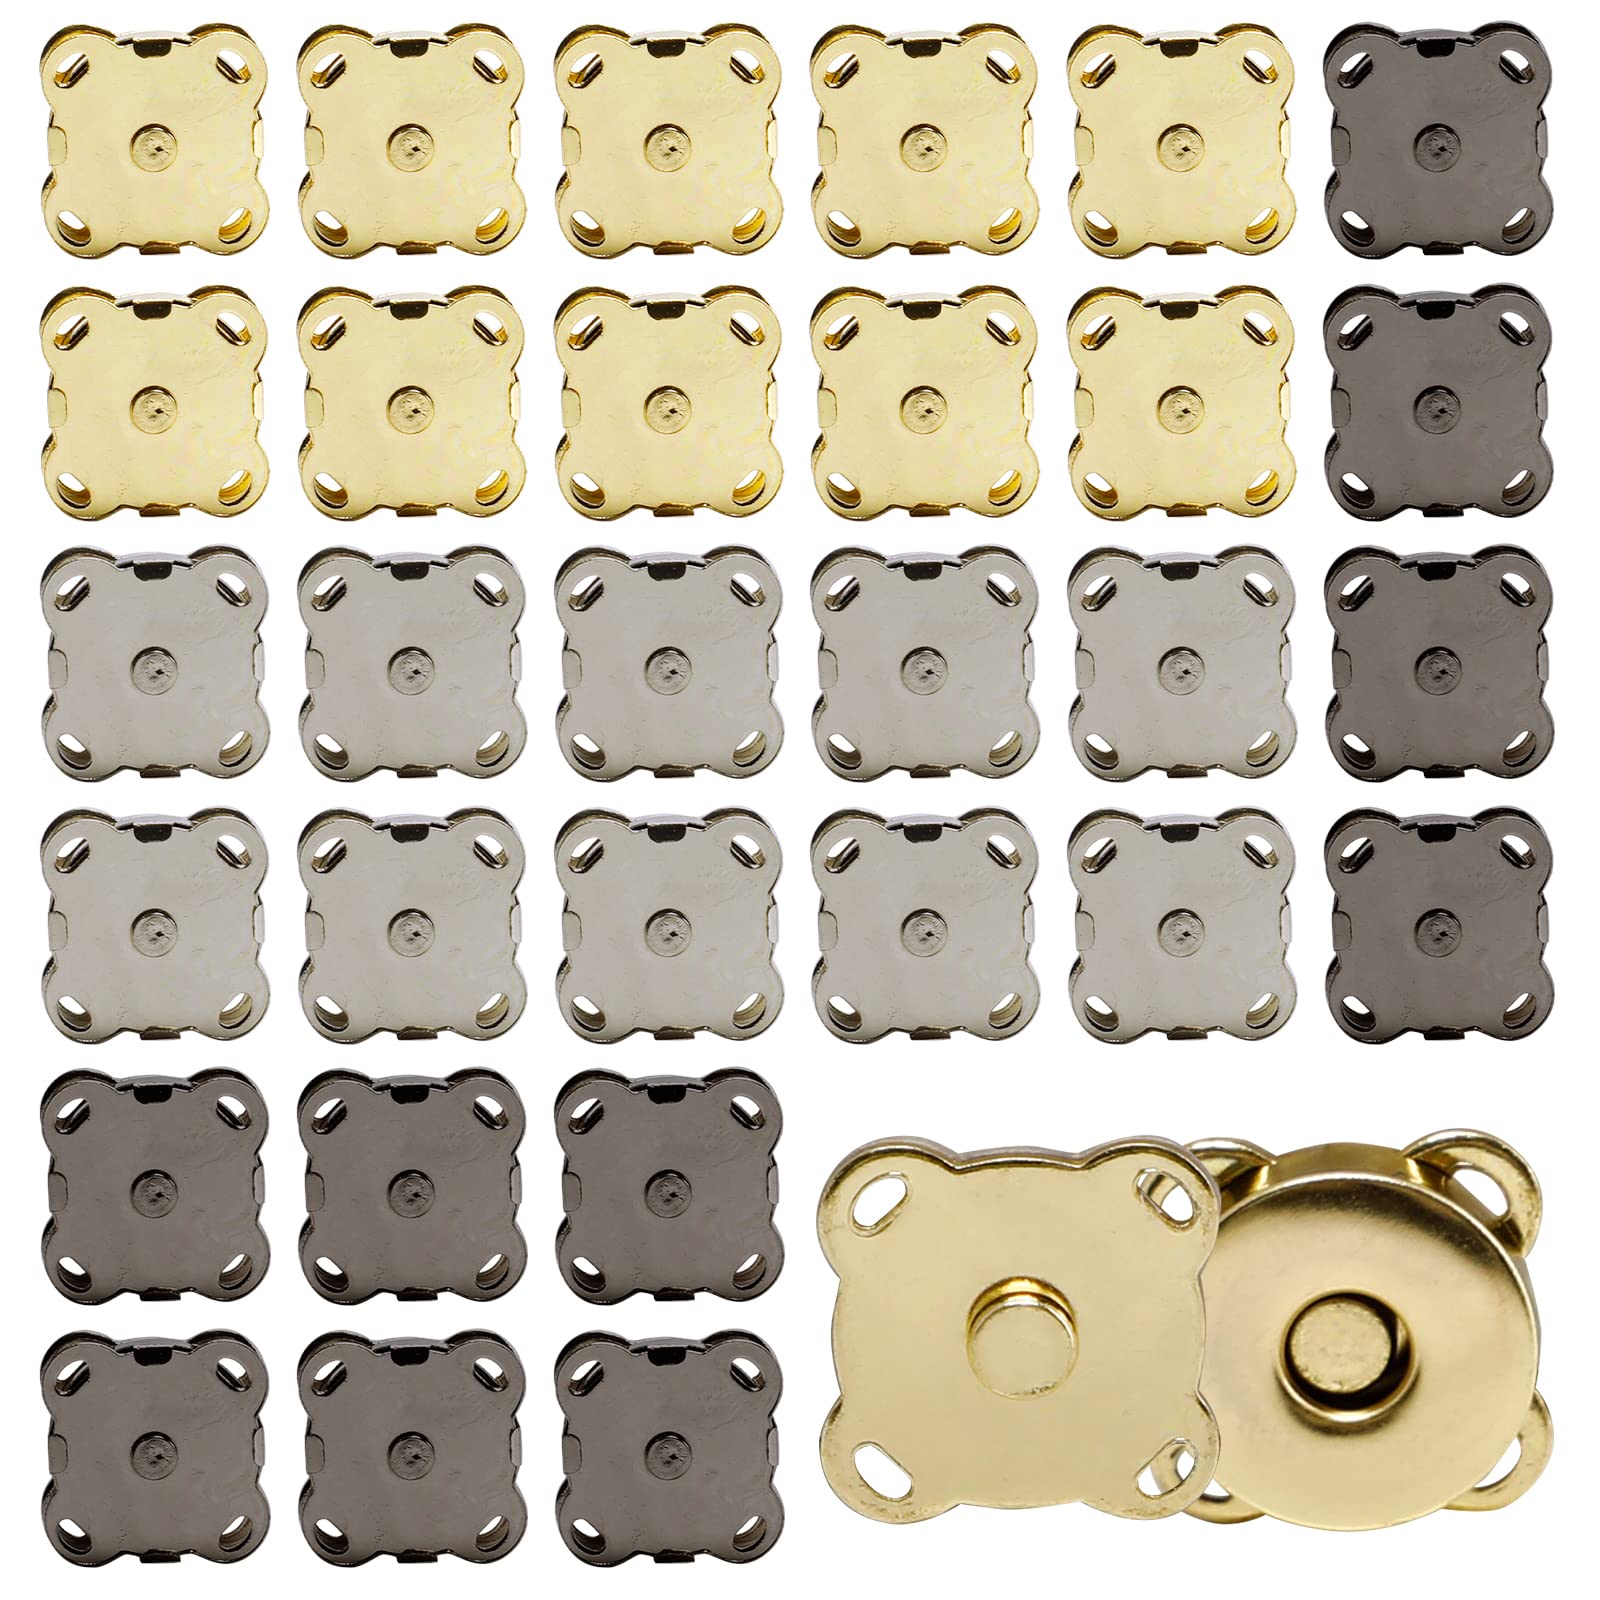 Magnetic Snaps Buttons Plum Magnetic Snap Closures For Purses Bags Clothes  Handbags Scrapbooking,Magnetic Purse Closure Fasteners,Sewing On Magnetic -  Imported Products from USA - iBhejo